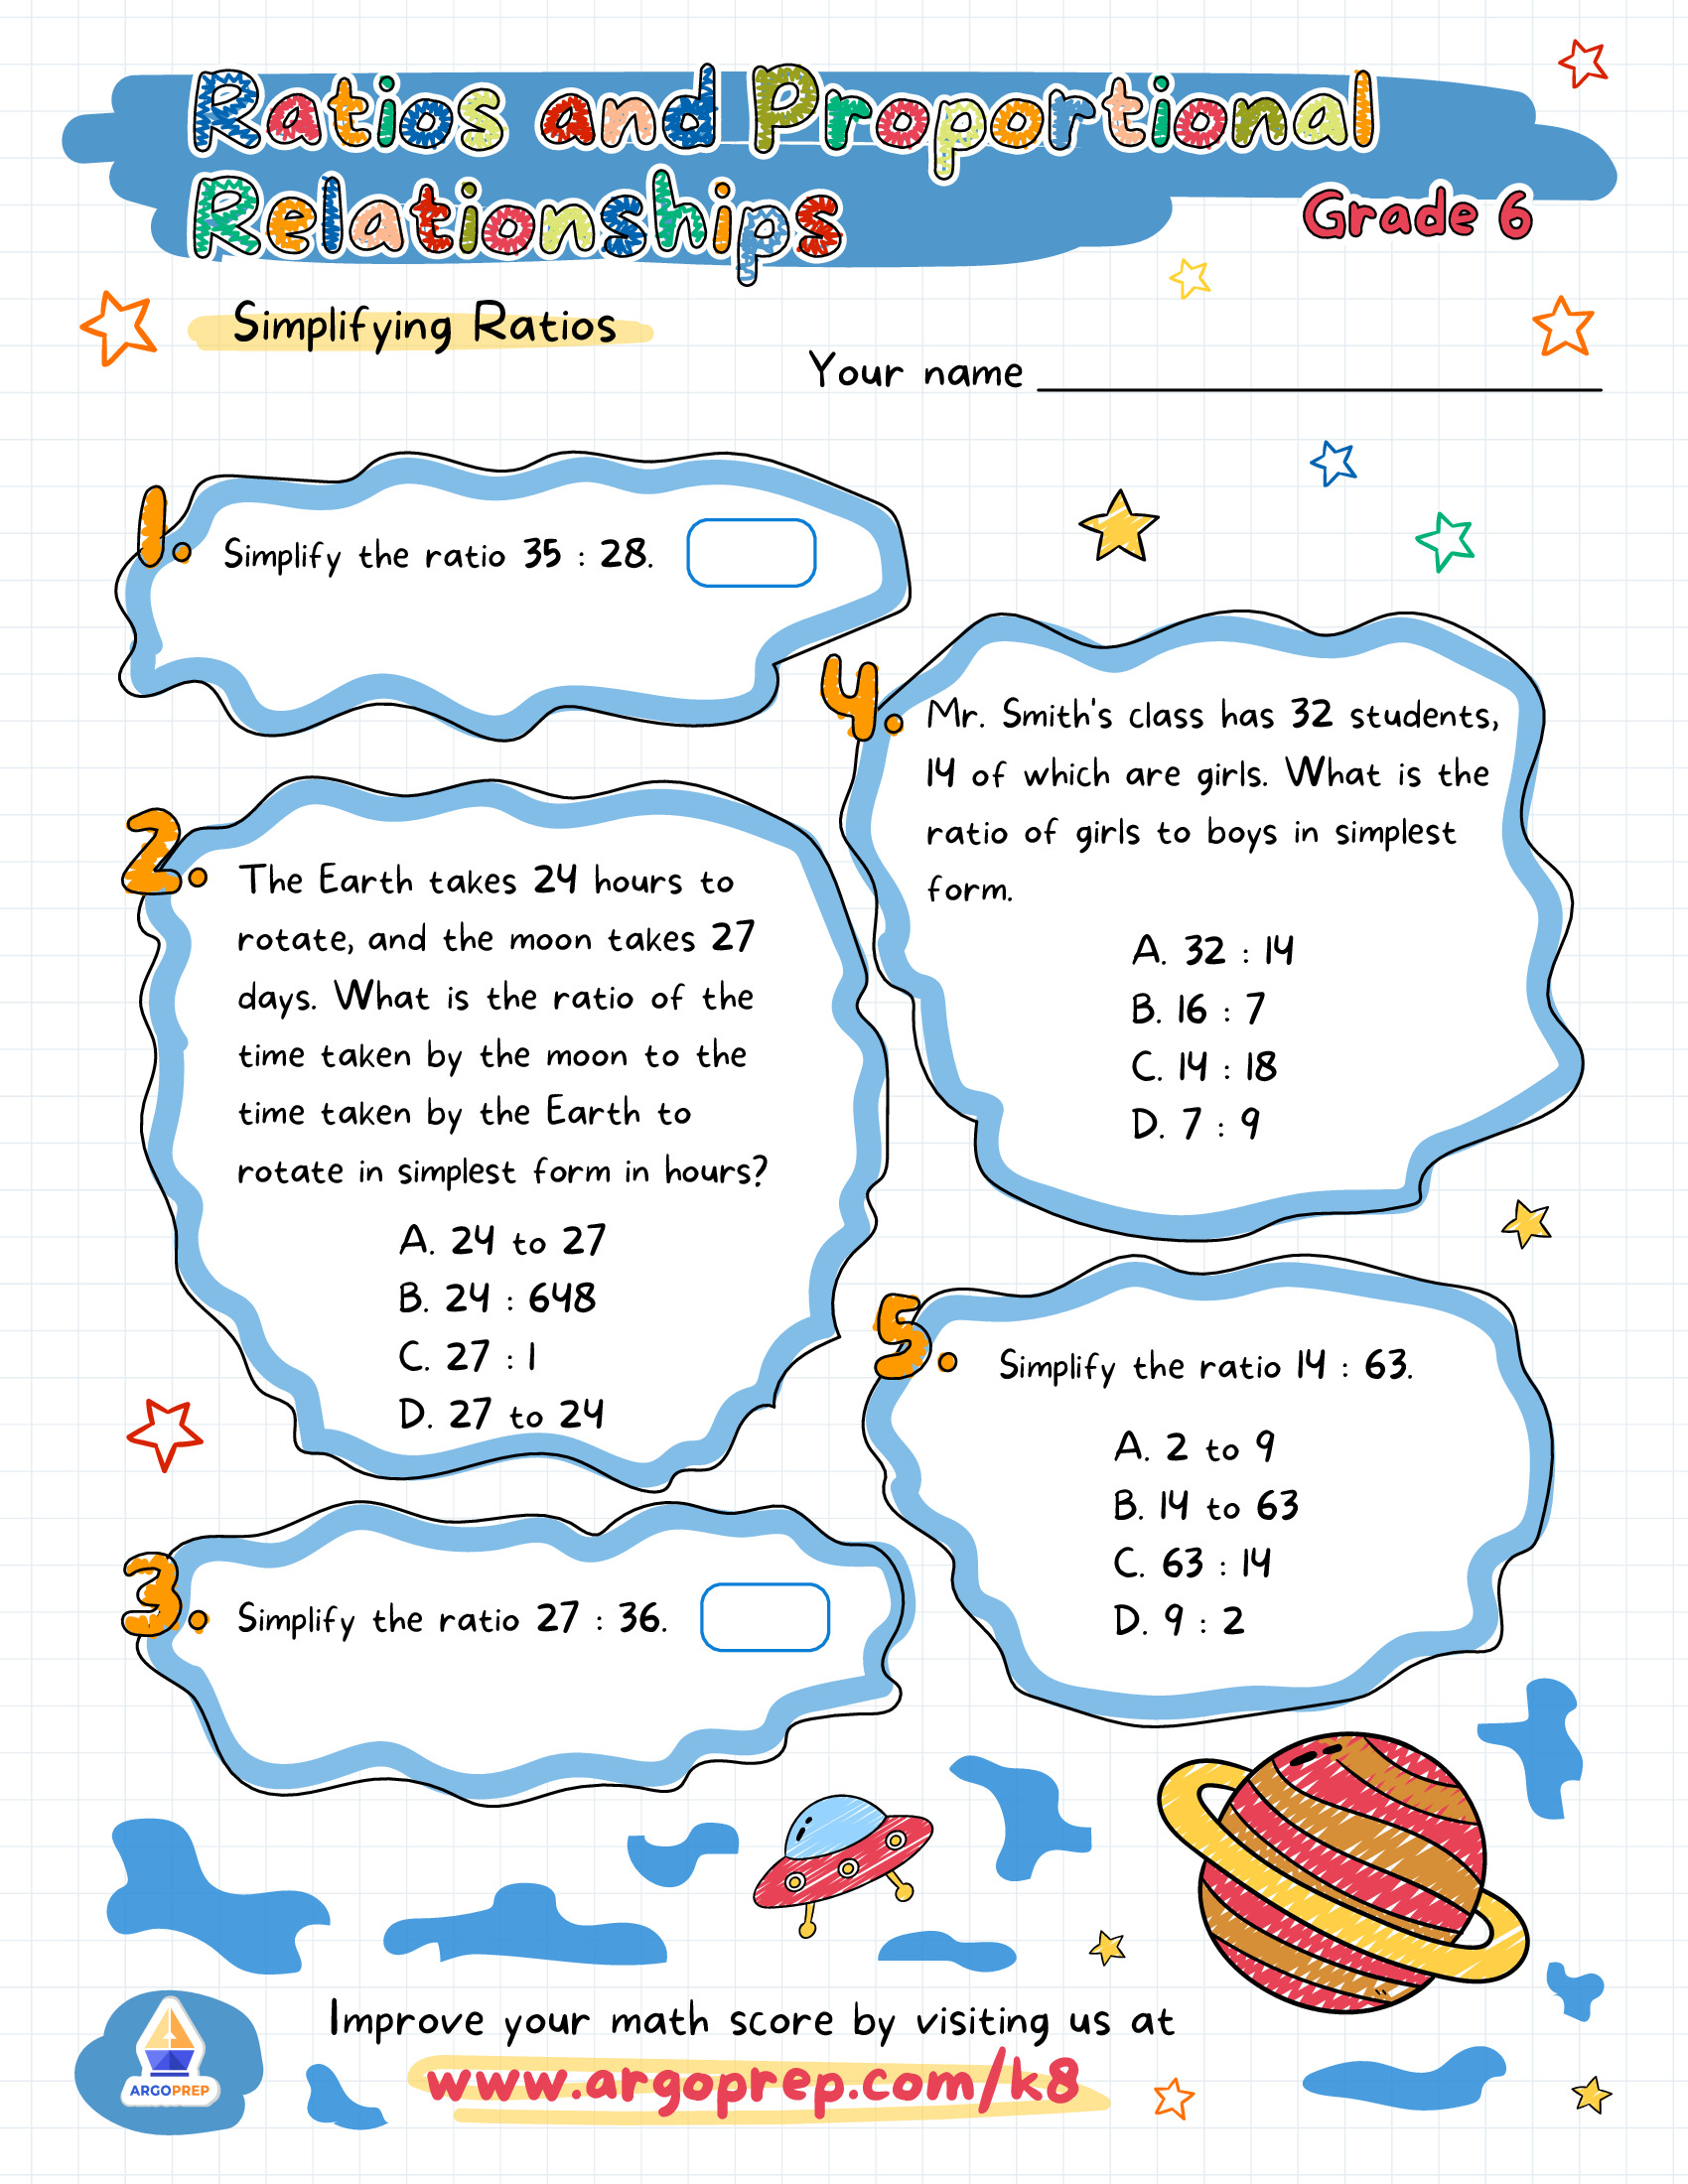 math practice problems number line mathscore